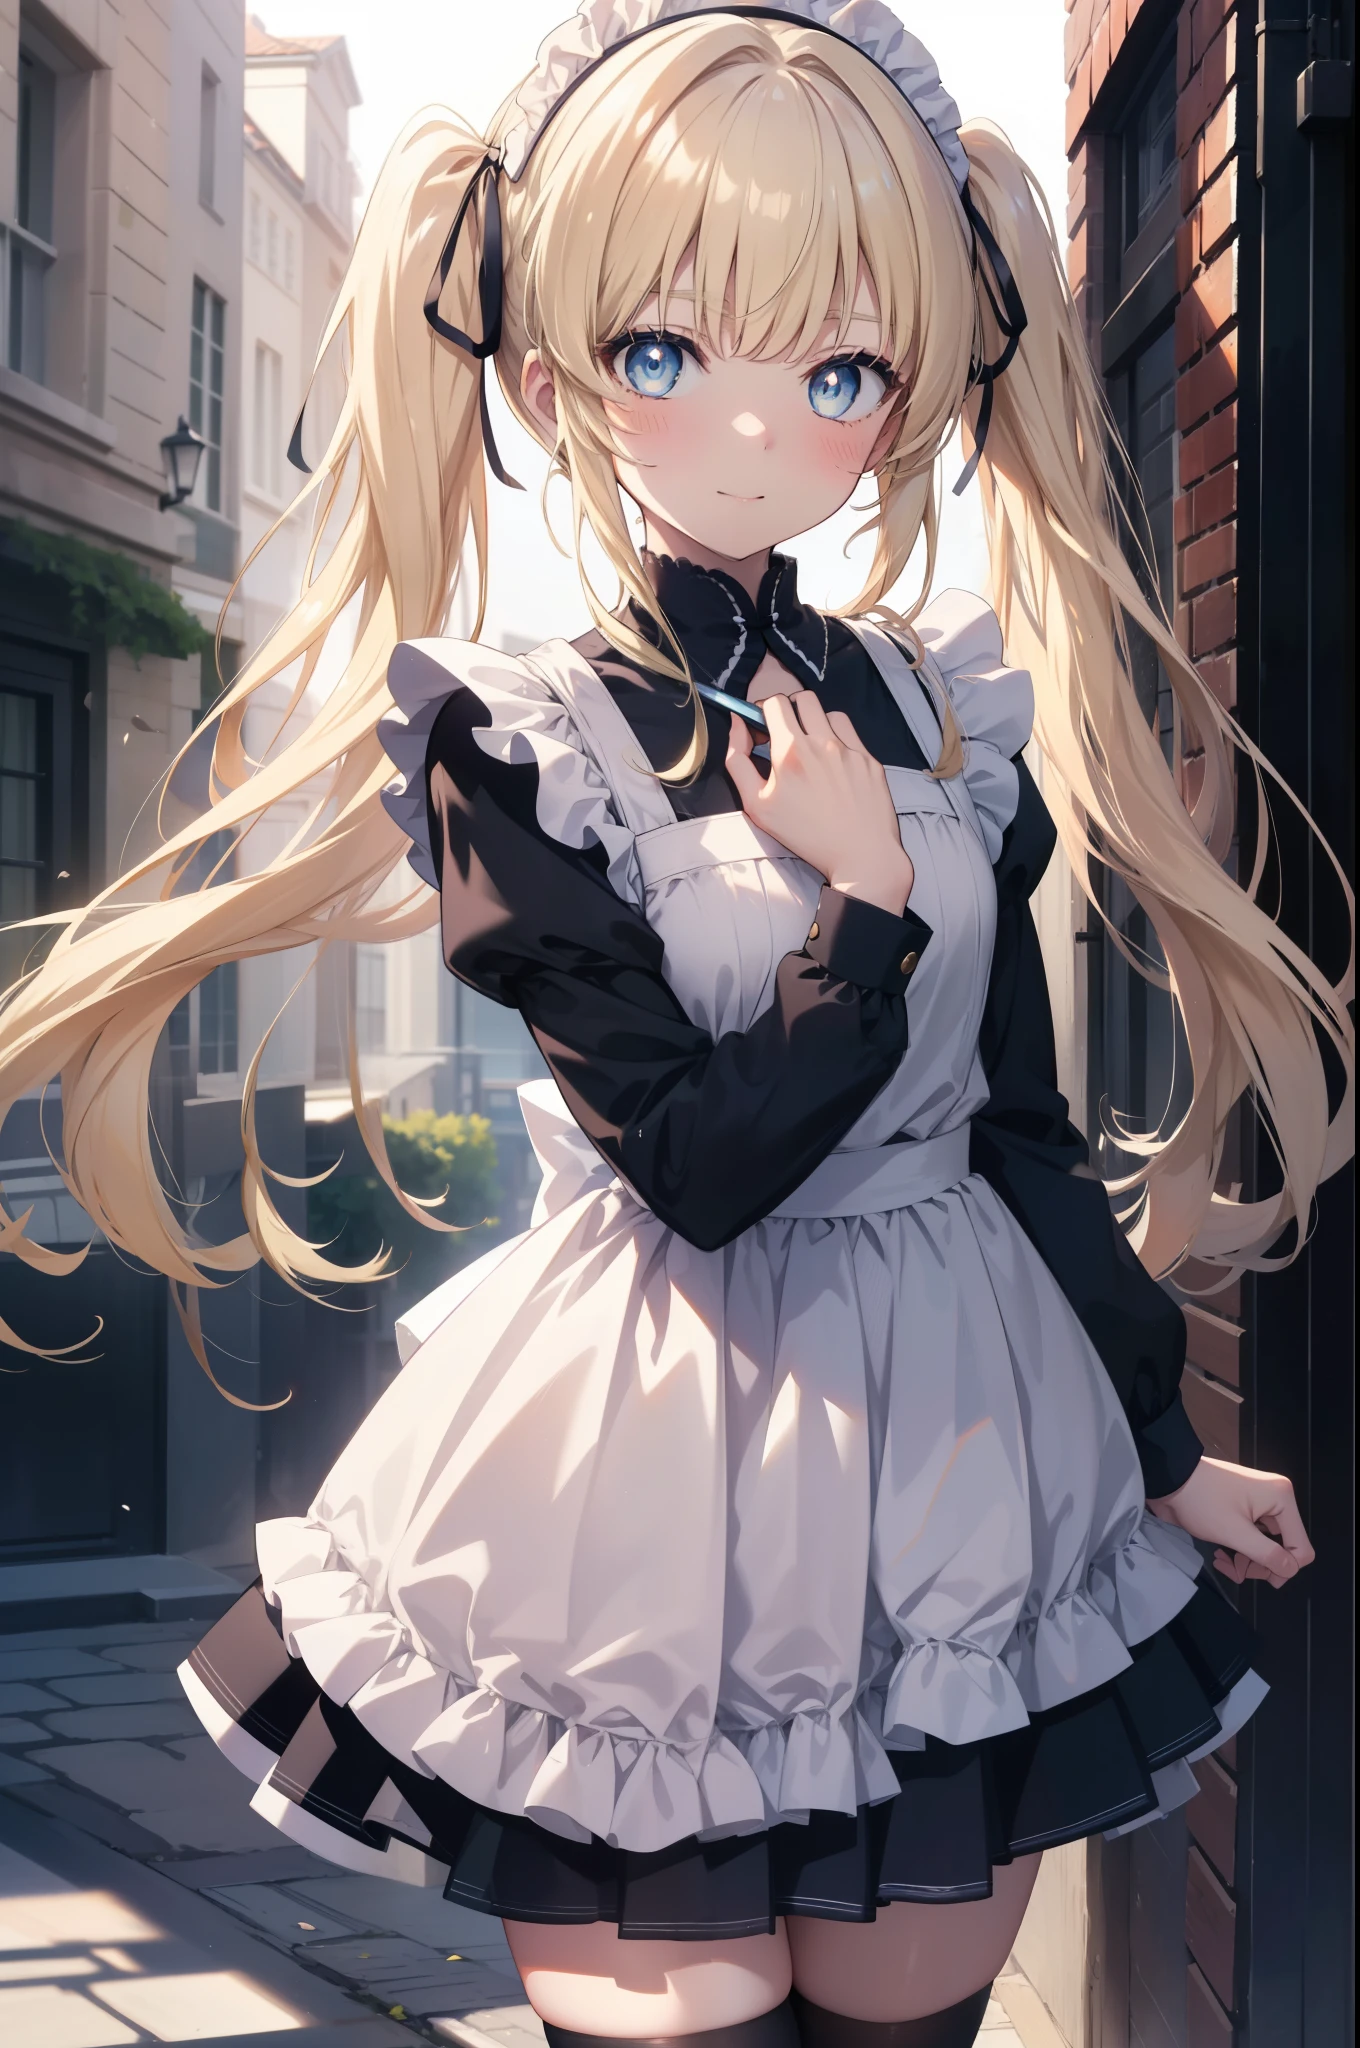 Eryllis Pencer, eriri sawamura spencer, blonde hair, blue eyes, dull bangs, hair ribbon, princess cut, long hair, twin tails,head dress,maid uniform, black mini skirt, white stockings,brown loafers,apron, looking at the viewer, clavicle, cute, smile, blush,open your mouth, Attract,He is holding a large amount of leaflets in both arms and passing them around.,,
break  outdoors, In town,building street,
break looking at viewer,
break (masterpiece:1.2), highest quality, High resolution, unity 8k wallpaper, (figure:0.8), (detailed and beautiful eyes:1.6), highly detailed face, perfect lighting, Very detailed CG, (perfect hands, perfect anatomy),